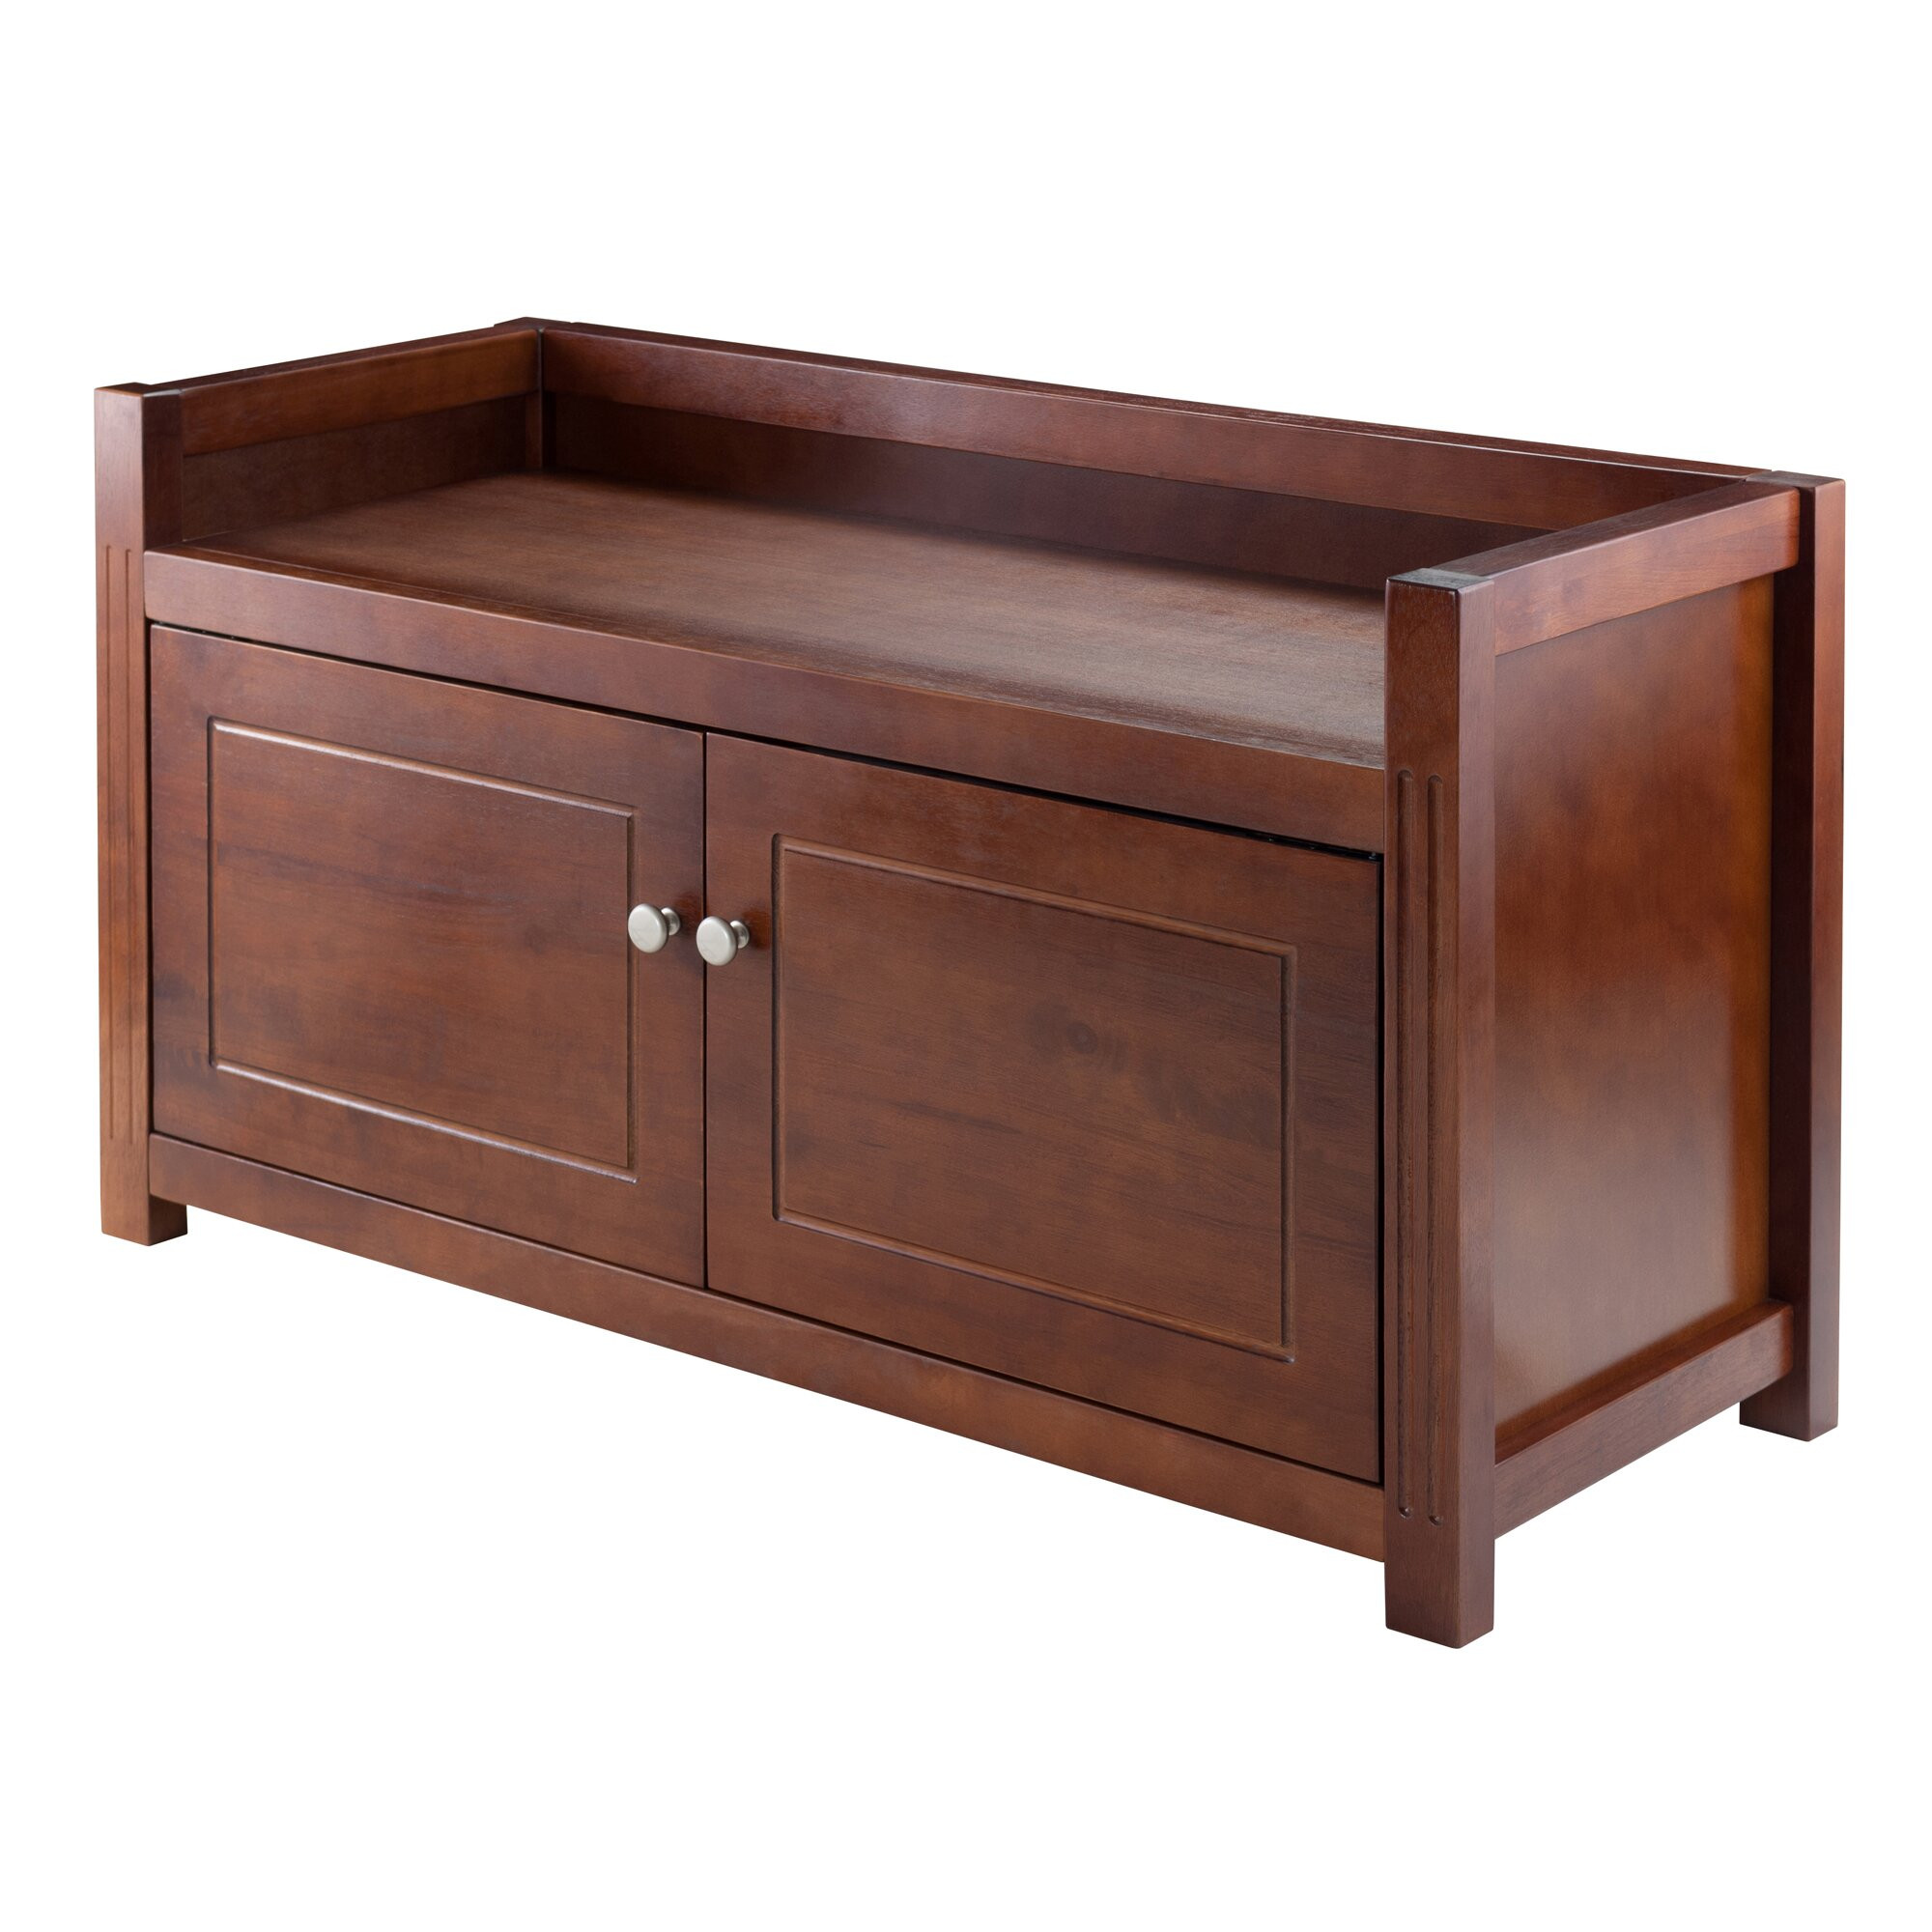 Small Wood Storage Bench
 Winsome Wooden Storage Bench & Reviews